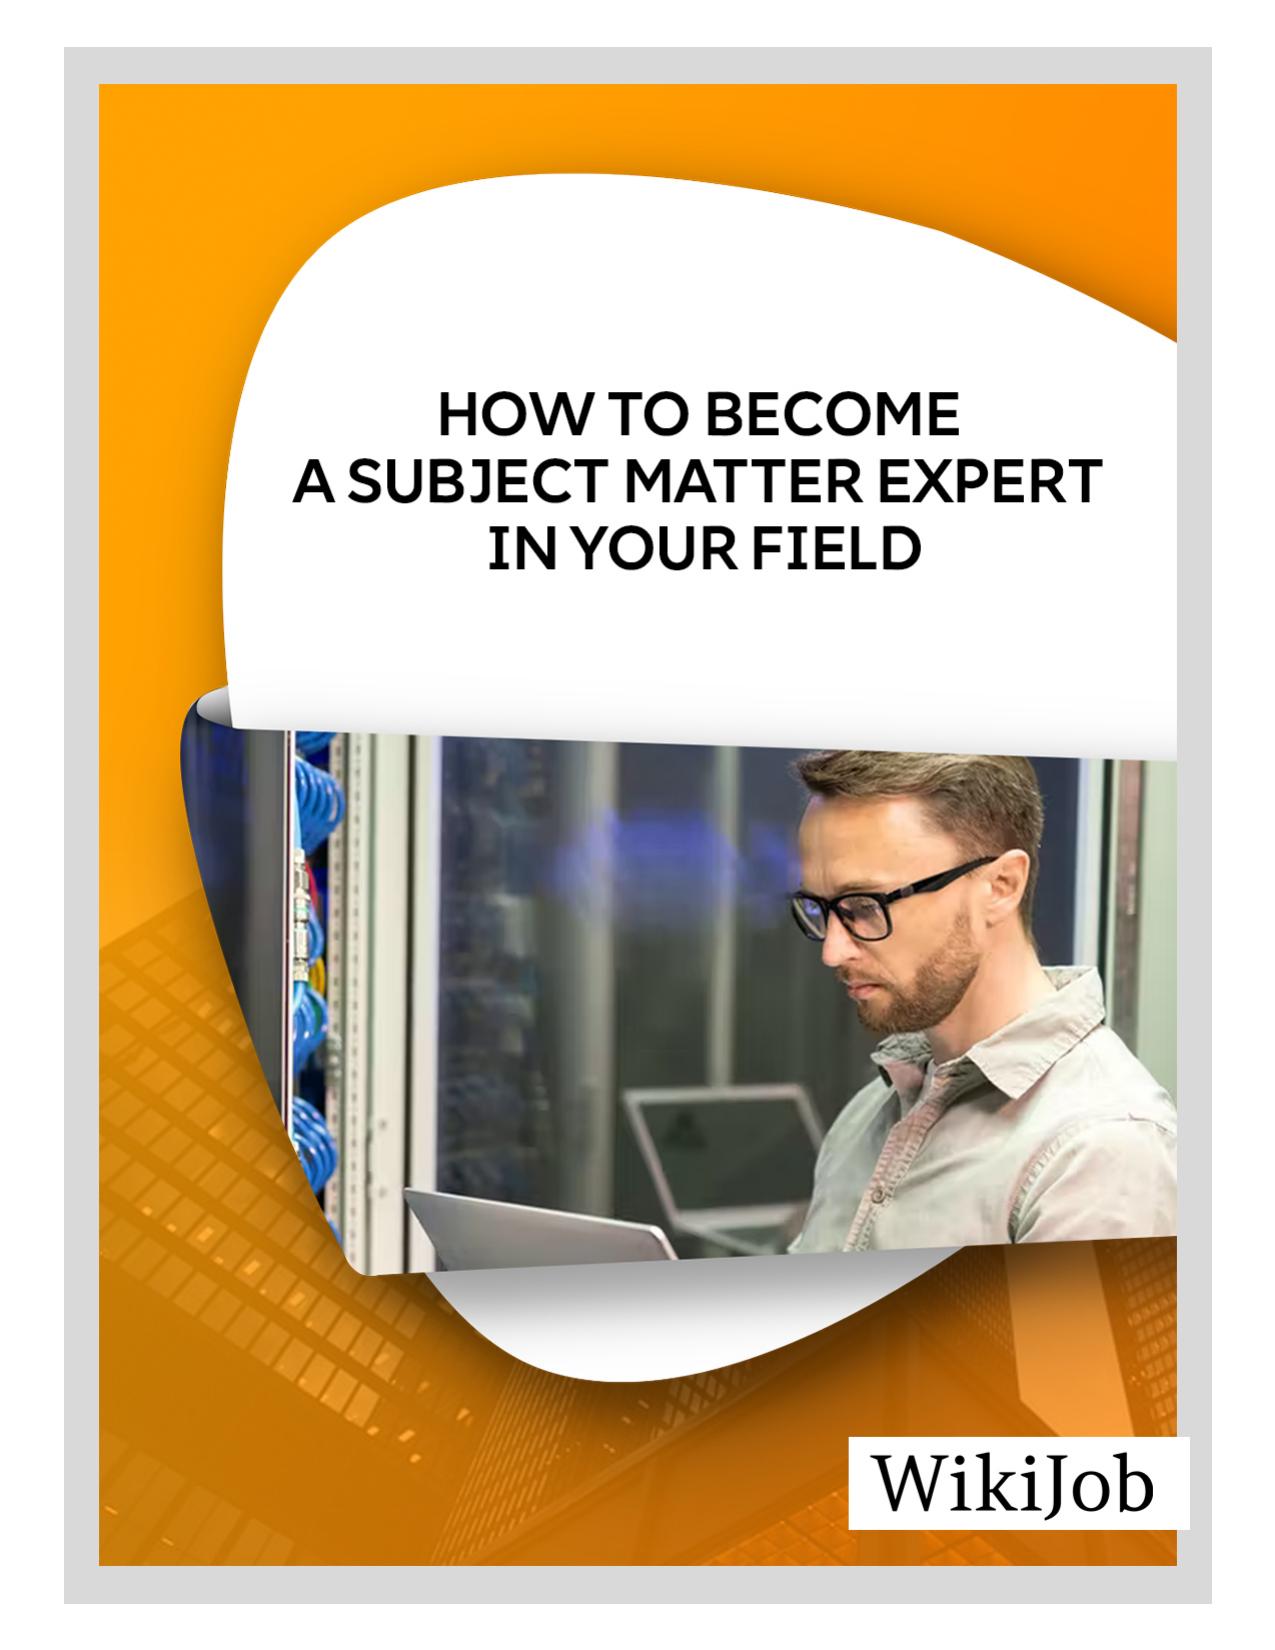 How to Become a Subject Matter Expert in Your Field